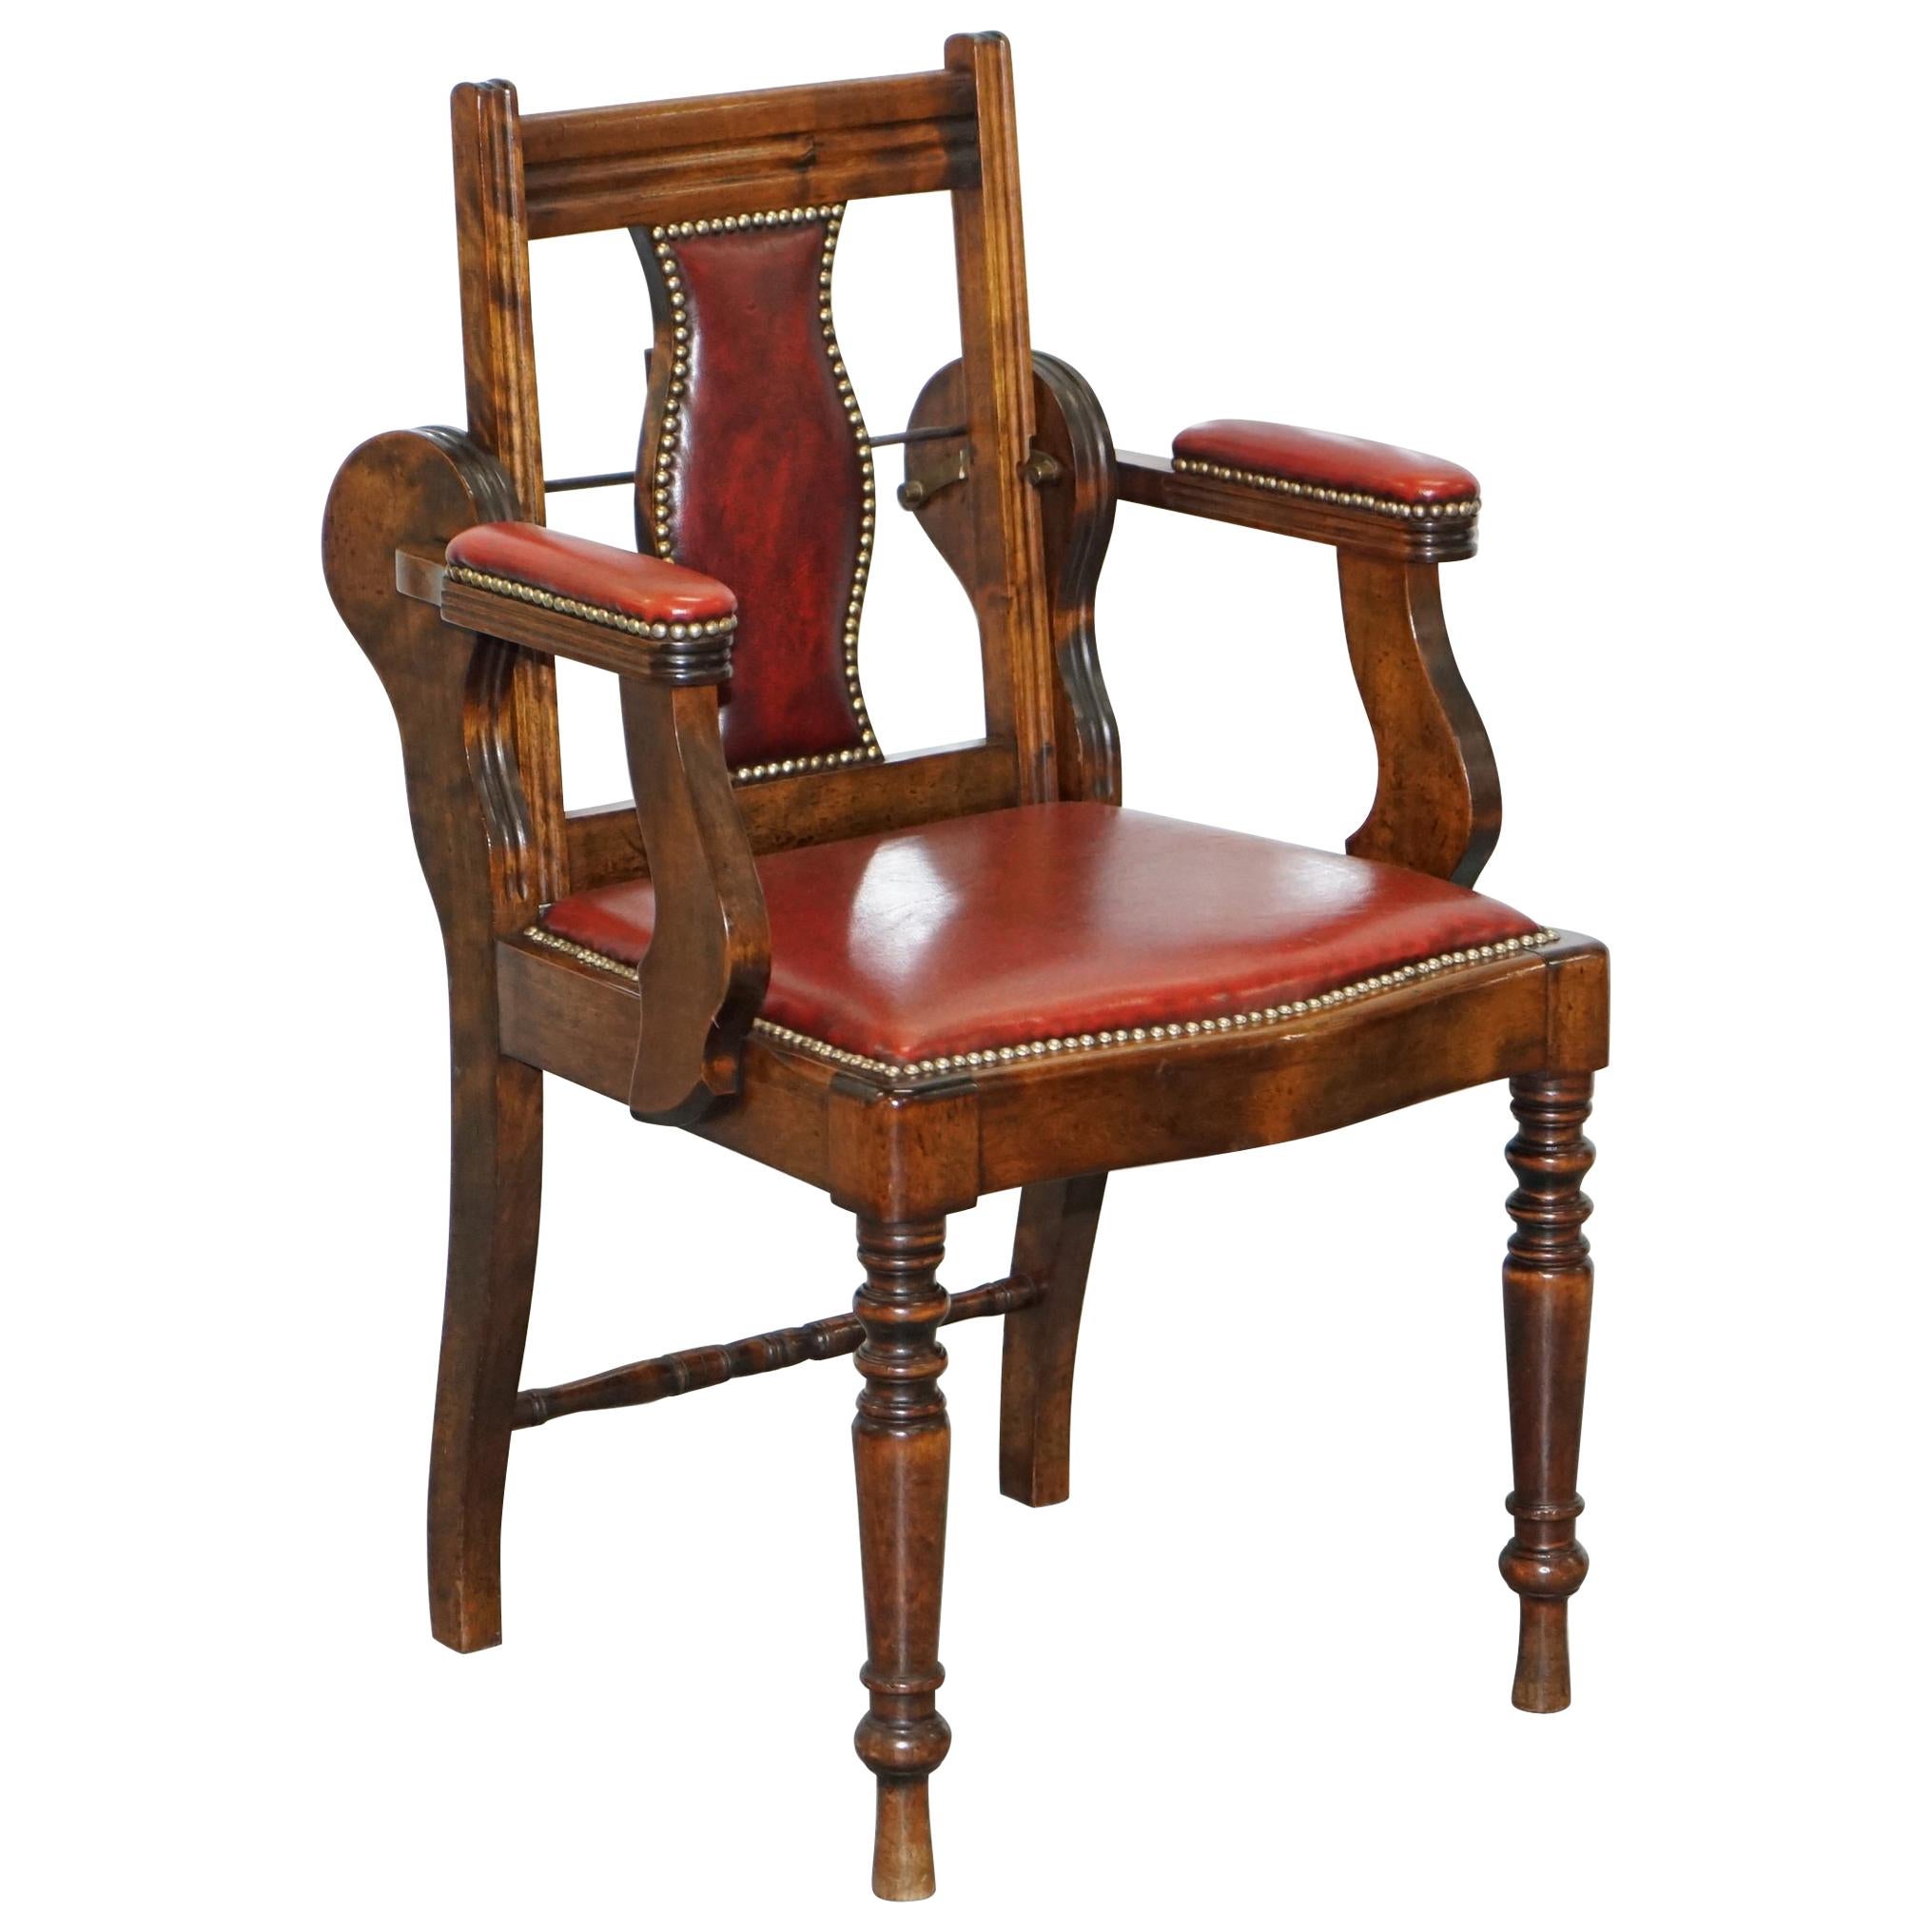 Rare circa 1850 Solid English Oak Leather Adjustable Barbers Chair Reclining